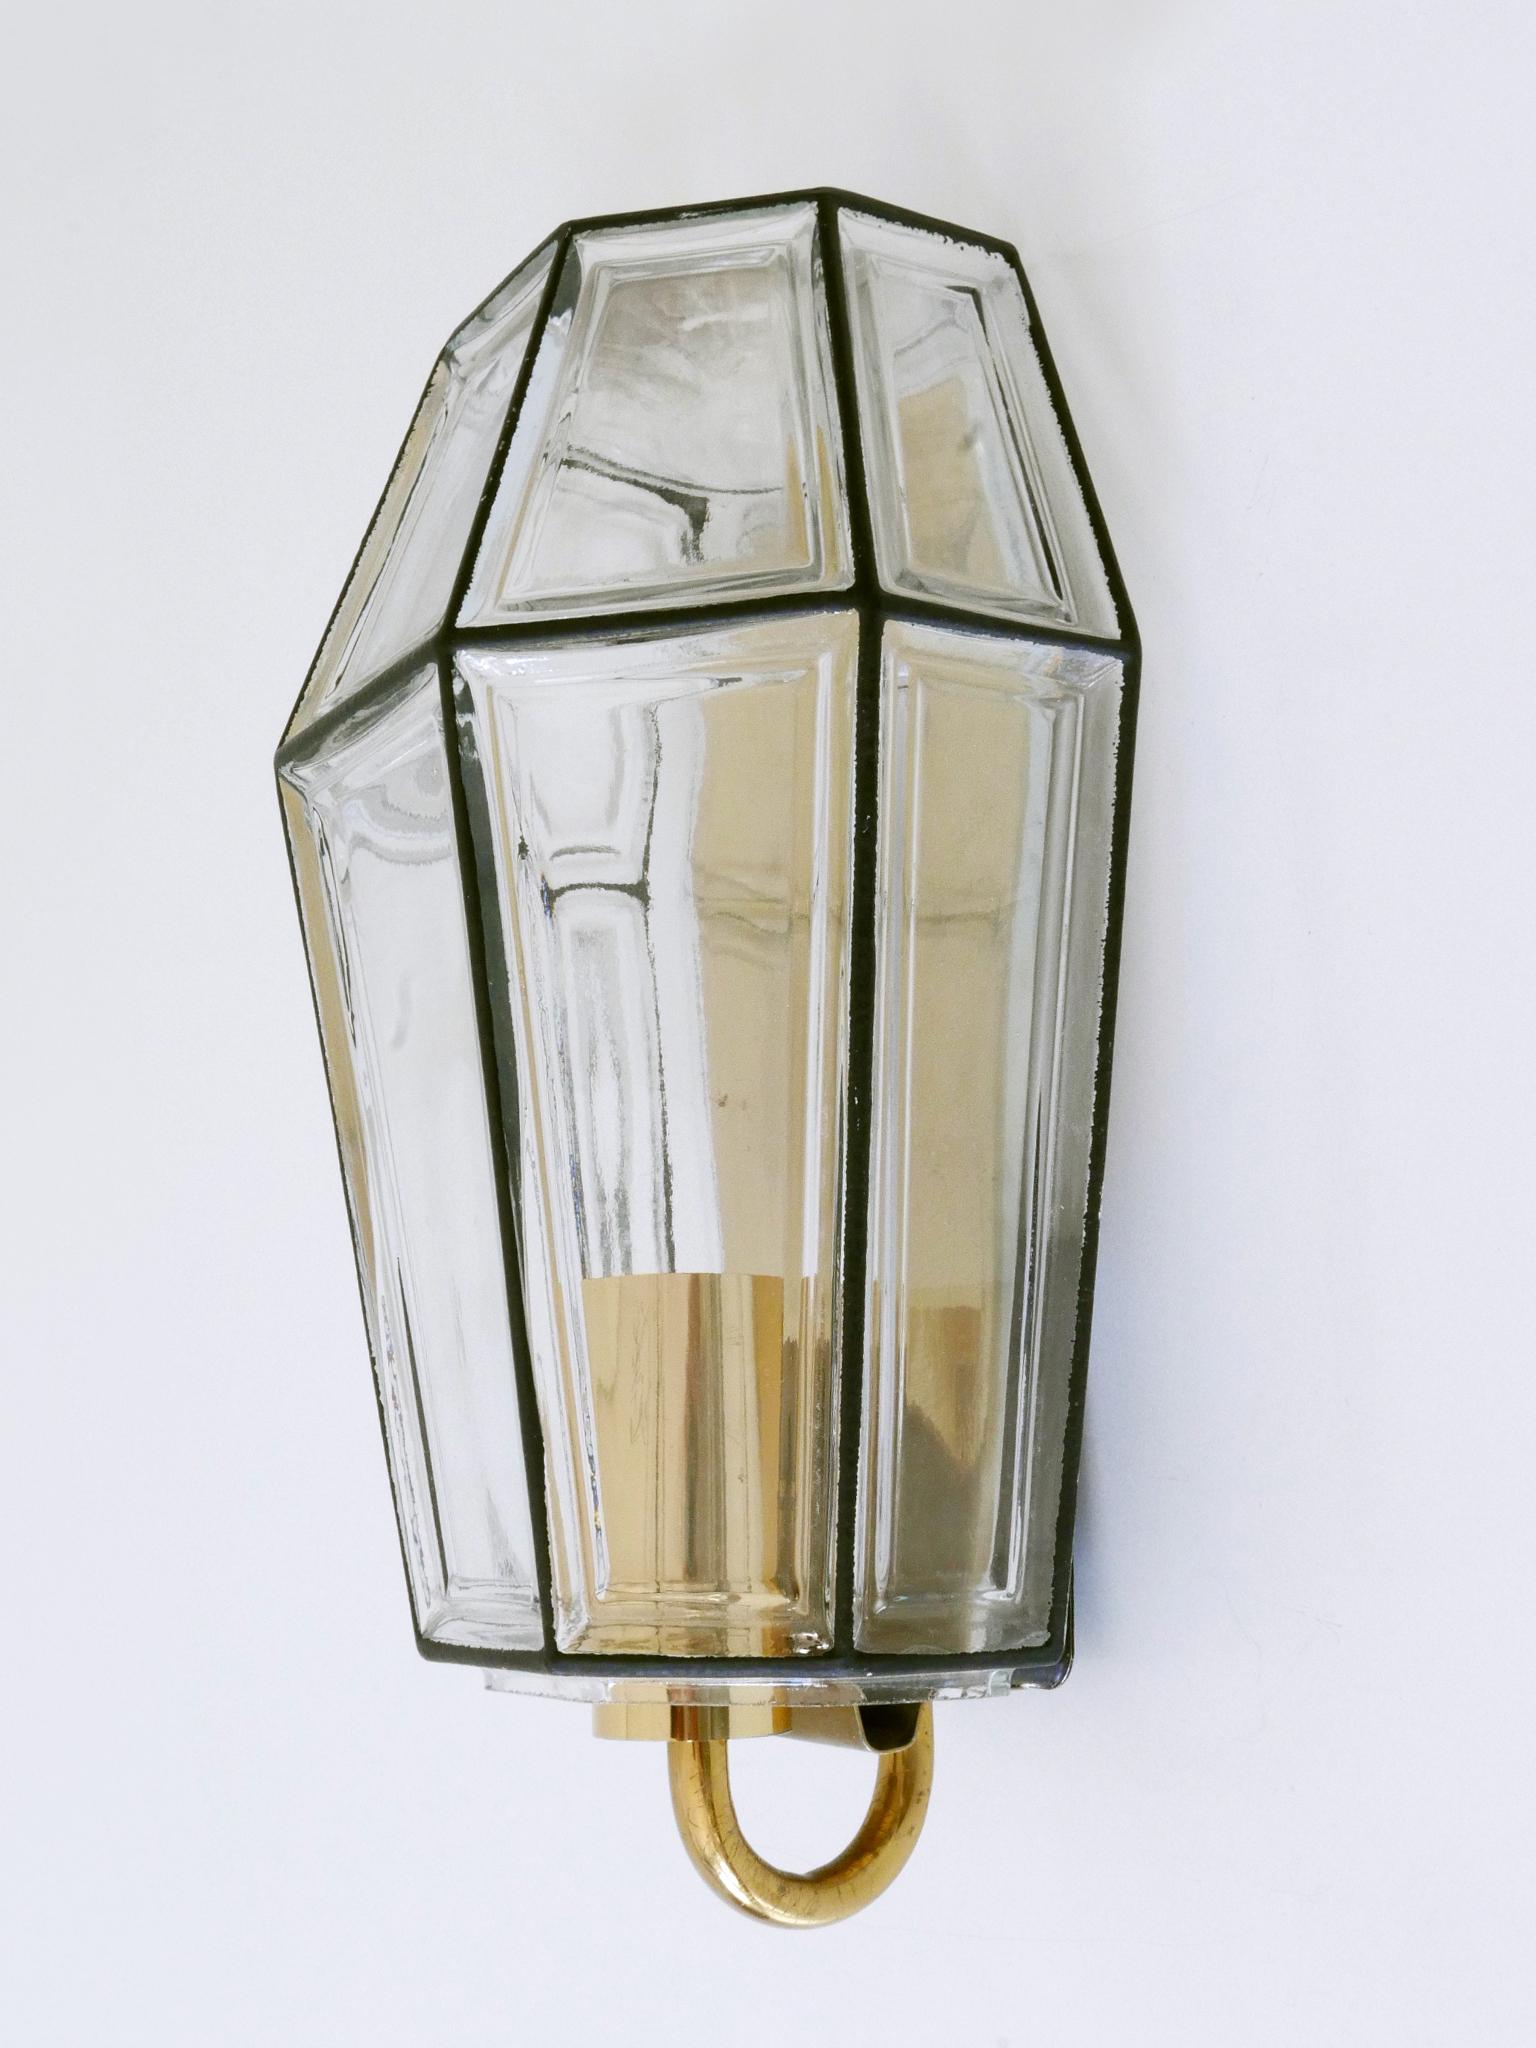 Set of Two Mid-Century Modern Sconces or Wall Fixtures by Glashütte Limburg For Sale 8